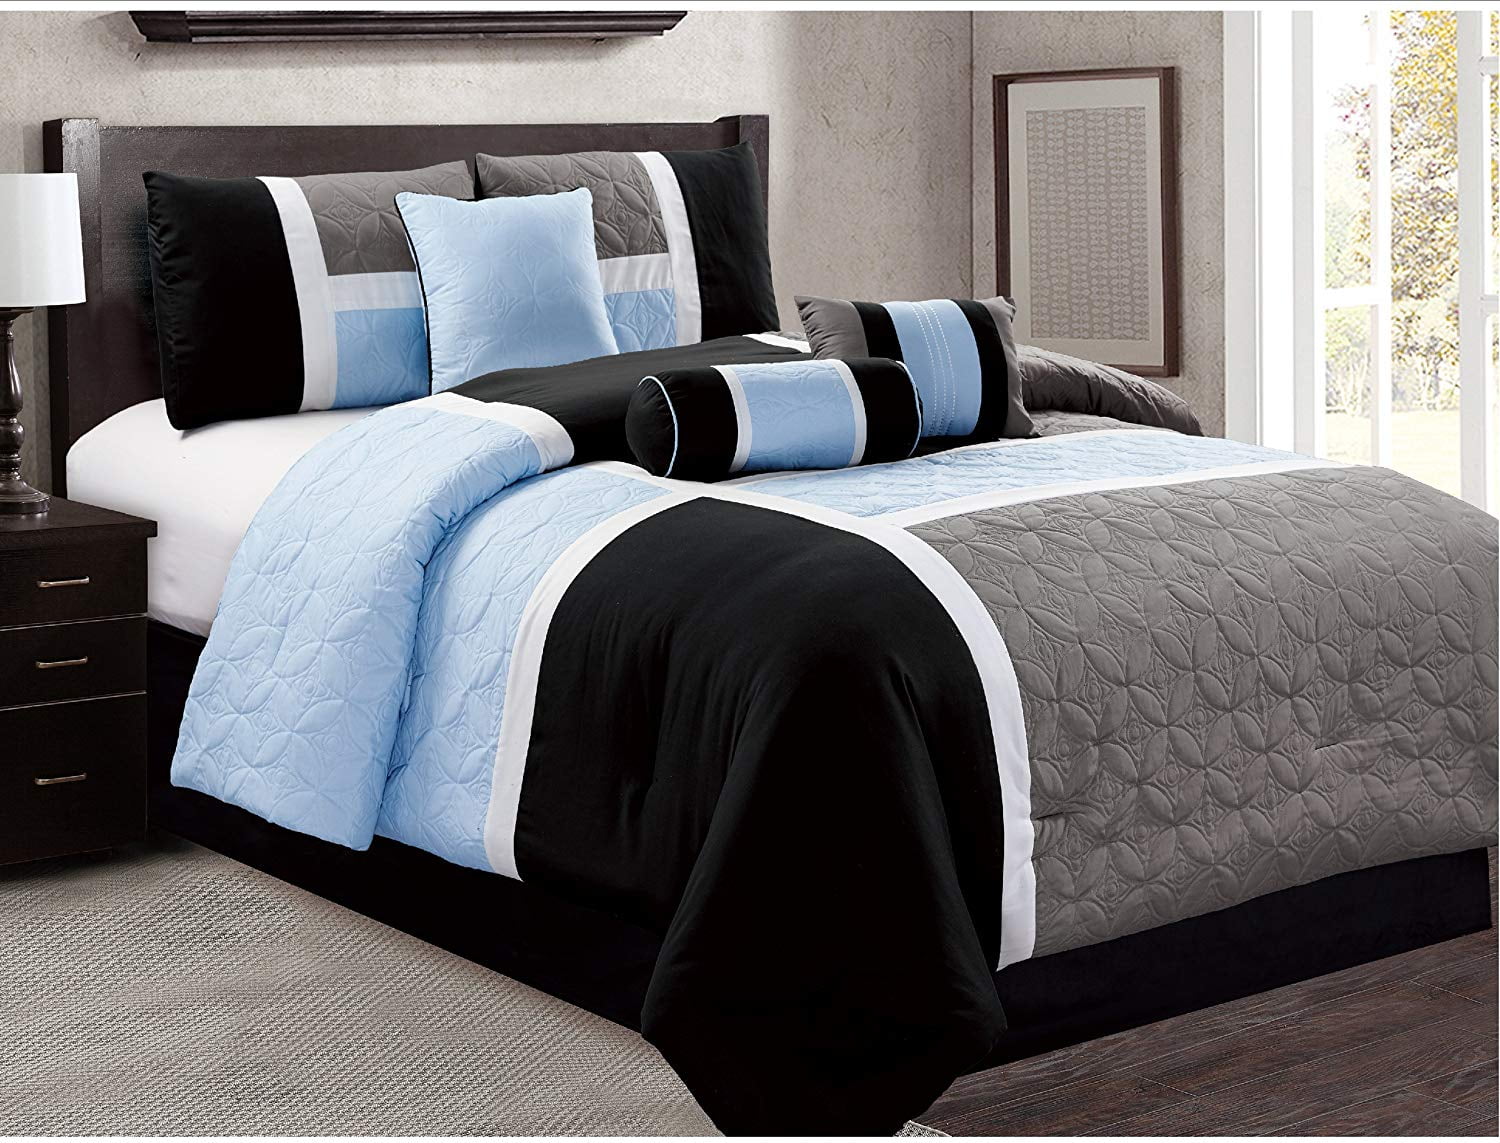 Black 7 Piece Luxury Soft Microfiber Quilted Patchwork Comforter Set Cal King 